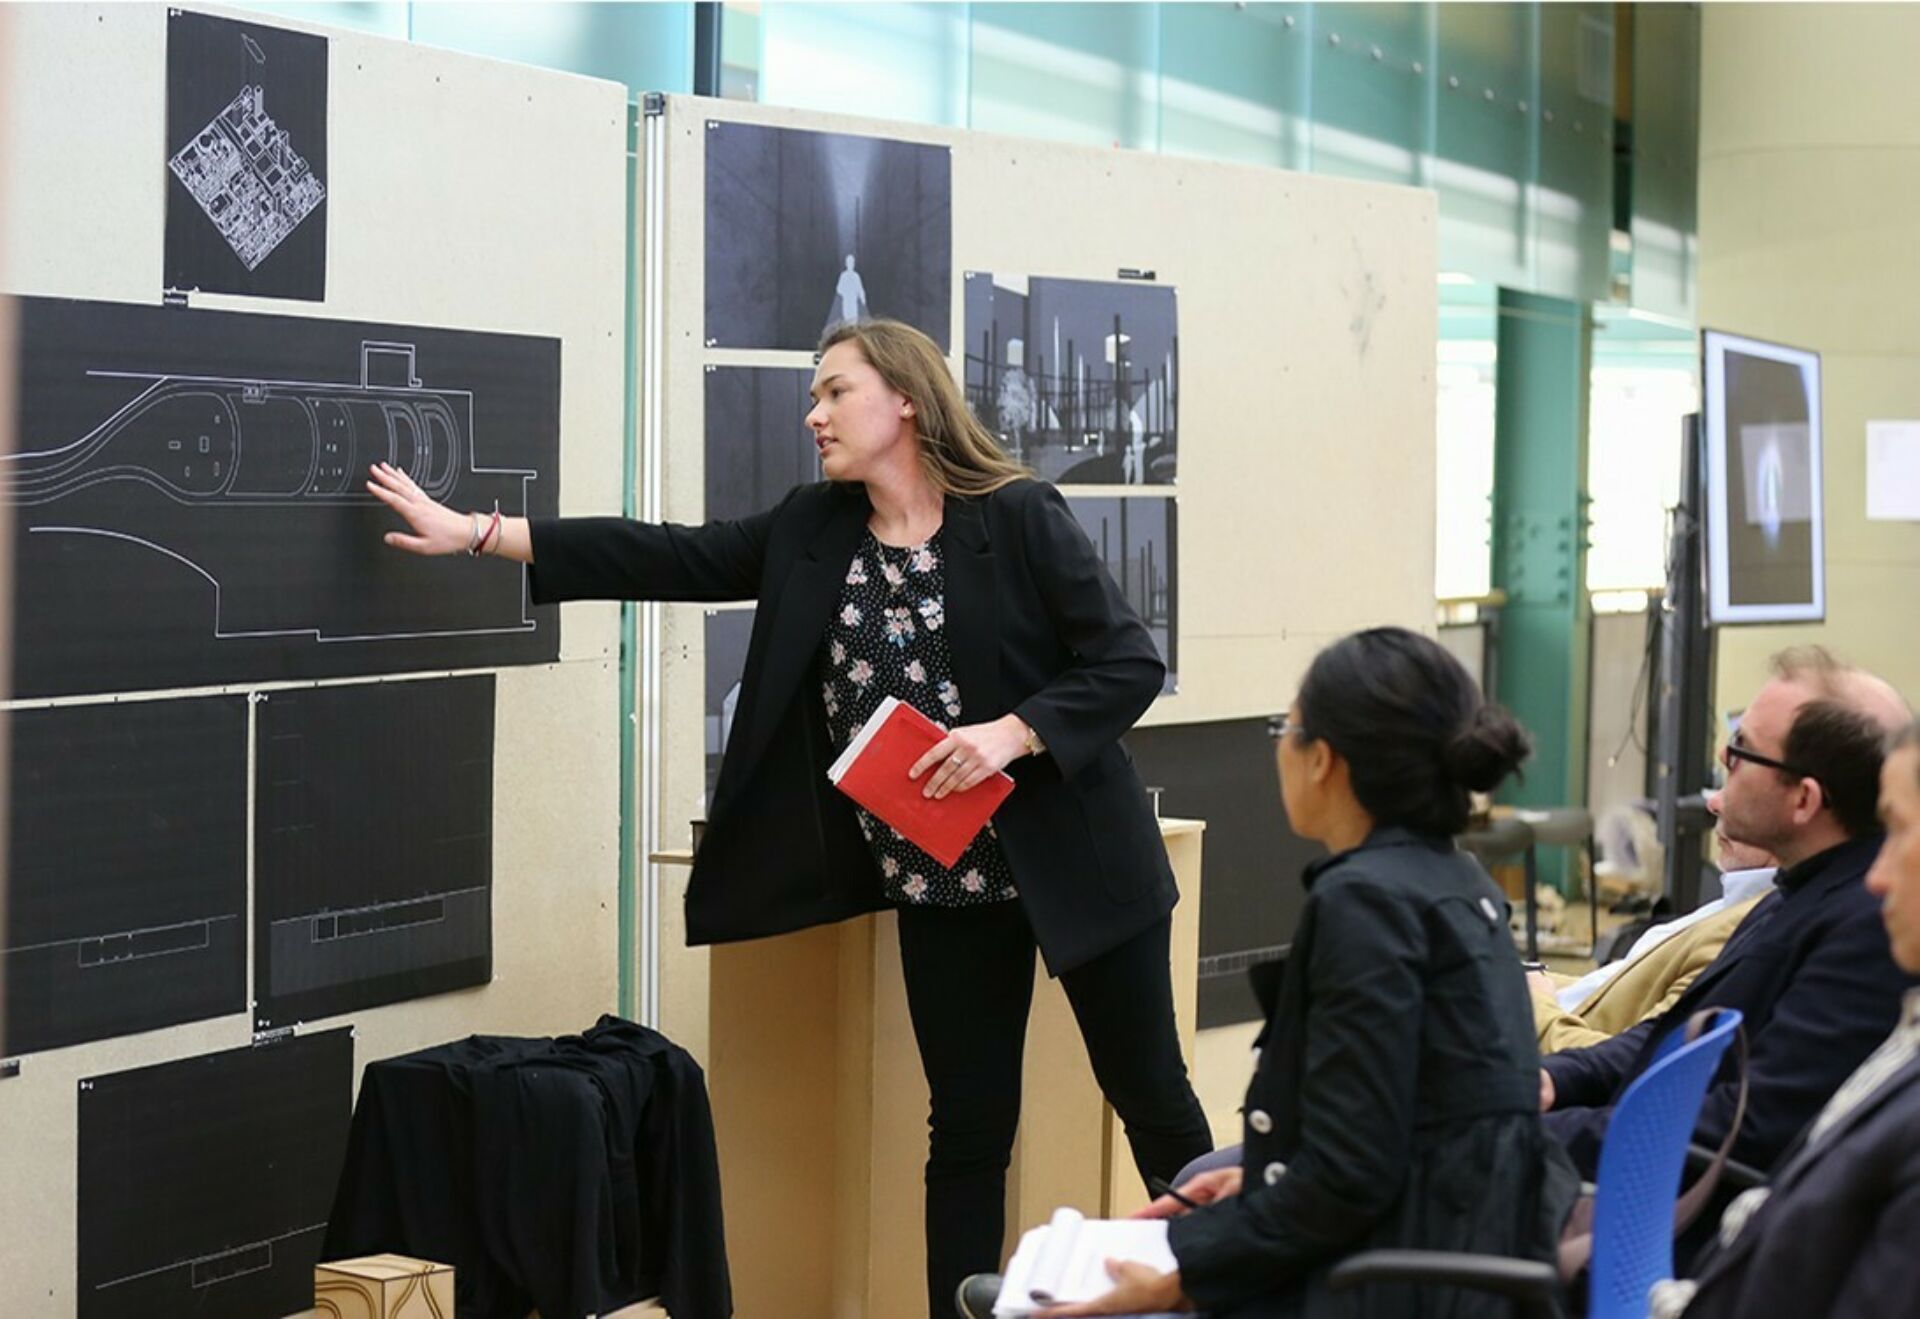 A female architecture presents her pinned up boards during reviews to the jury.